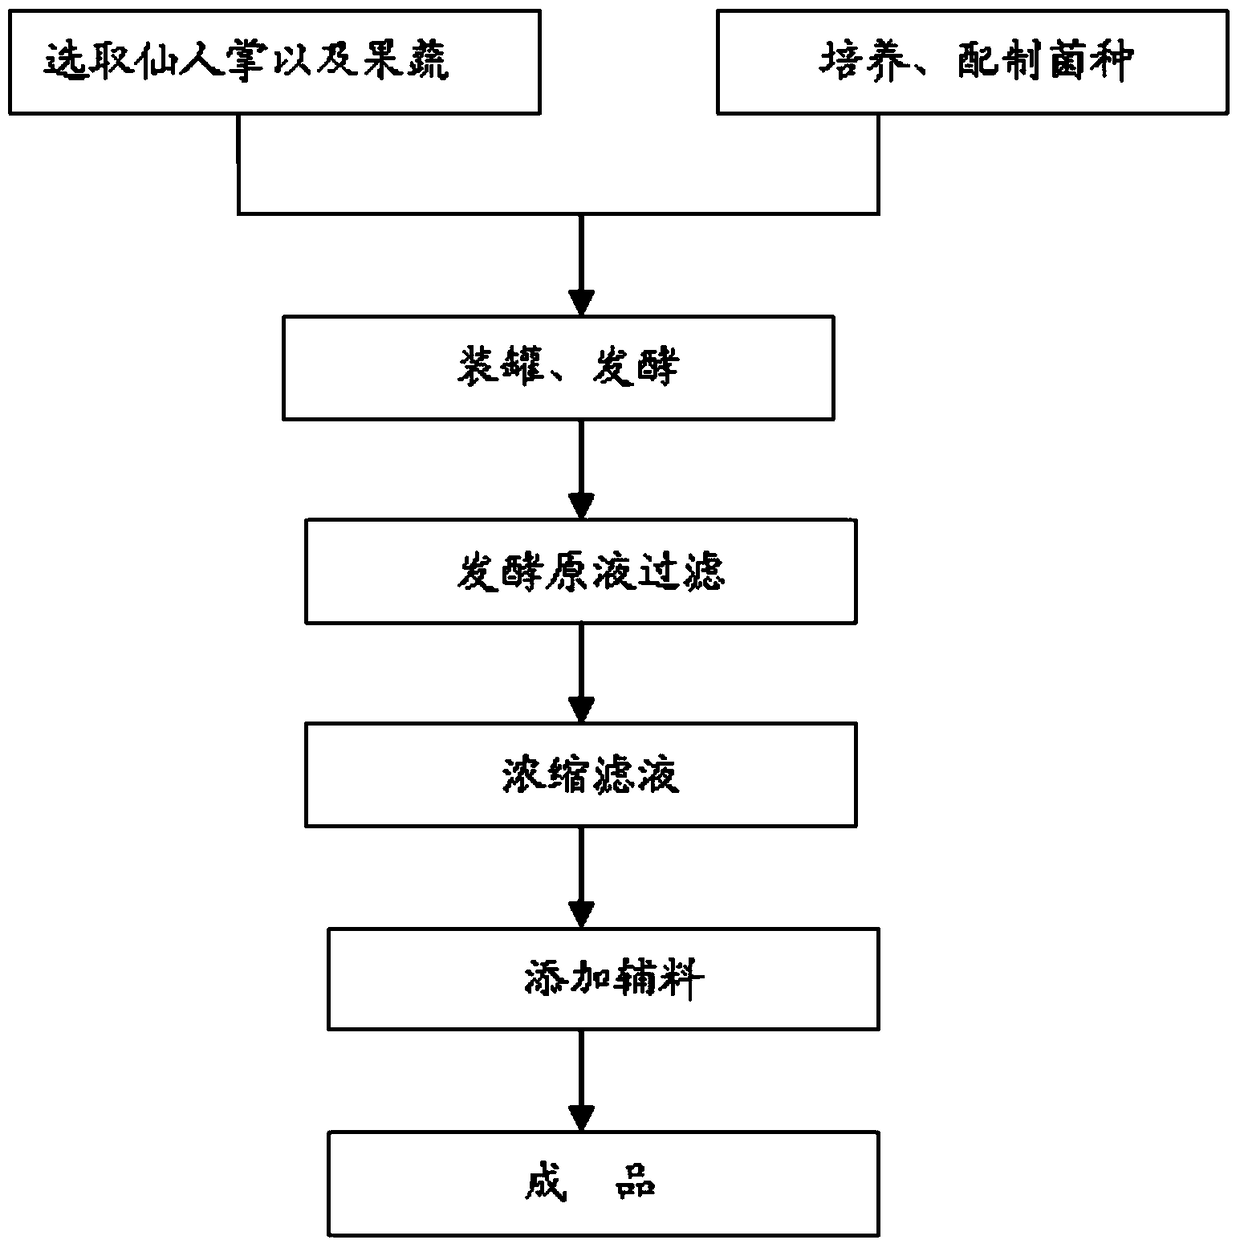 Preparation method of cactus fruit and vegetable enzyme and prepared cactus fruit and vegetable enzyme